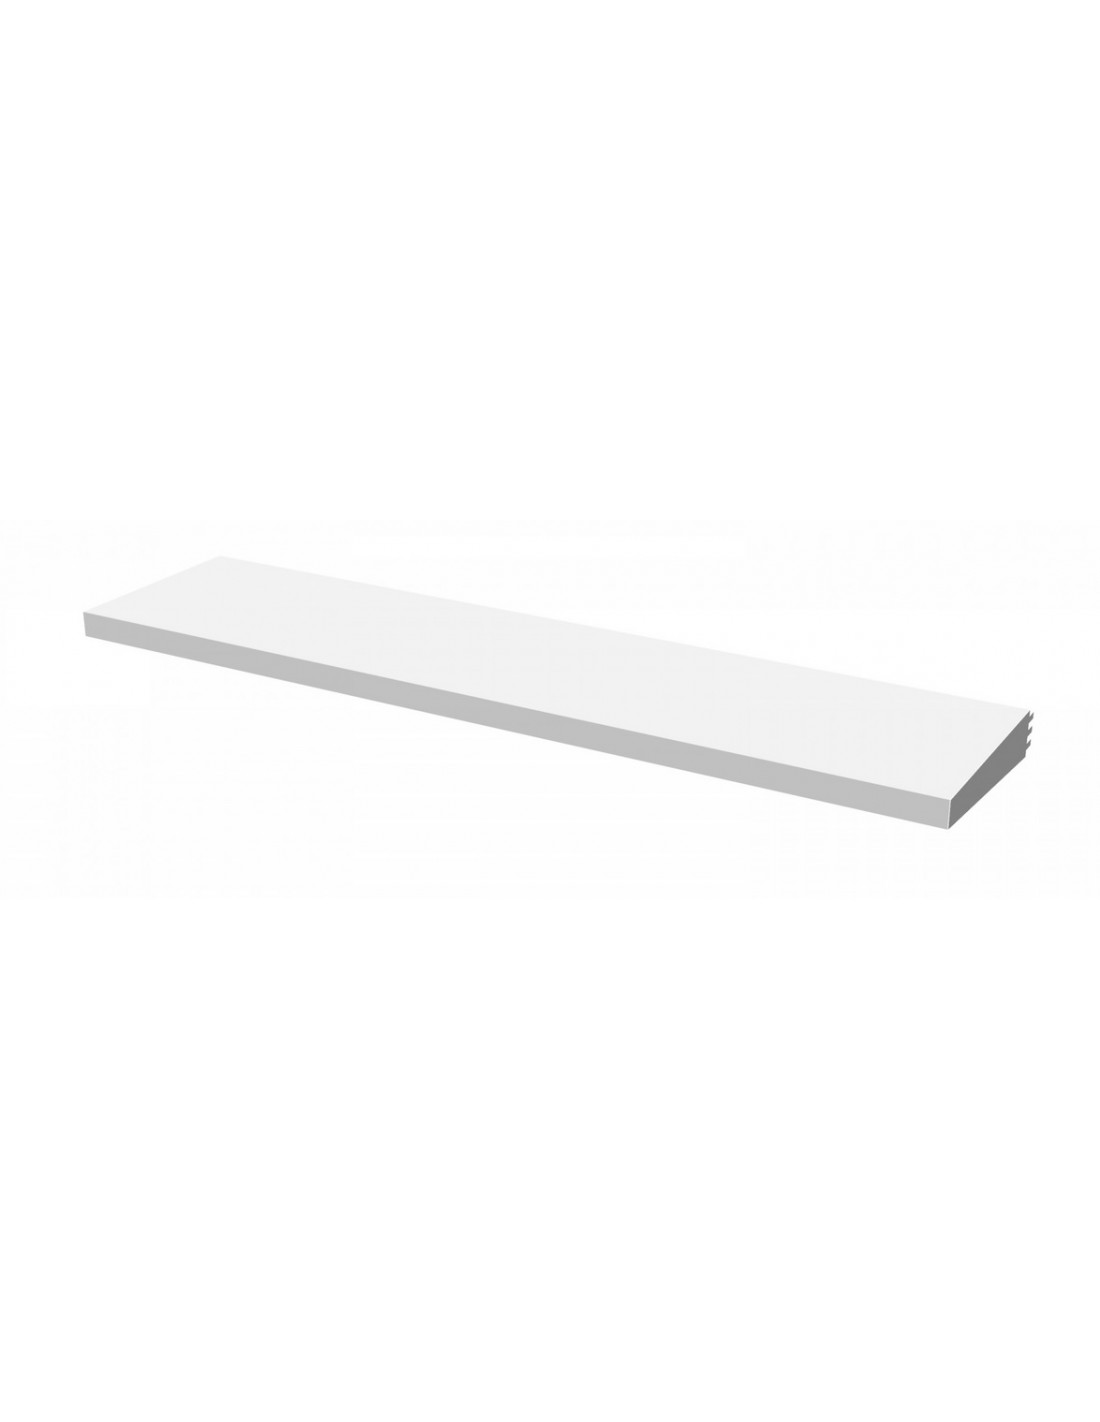 Additional shelf in white painted sheet cm 150